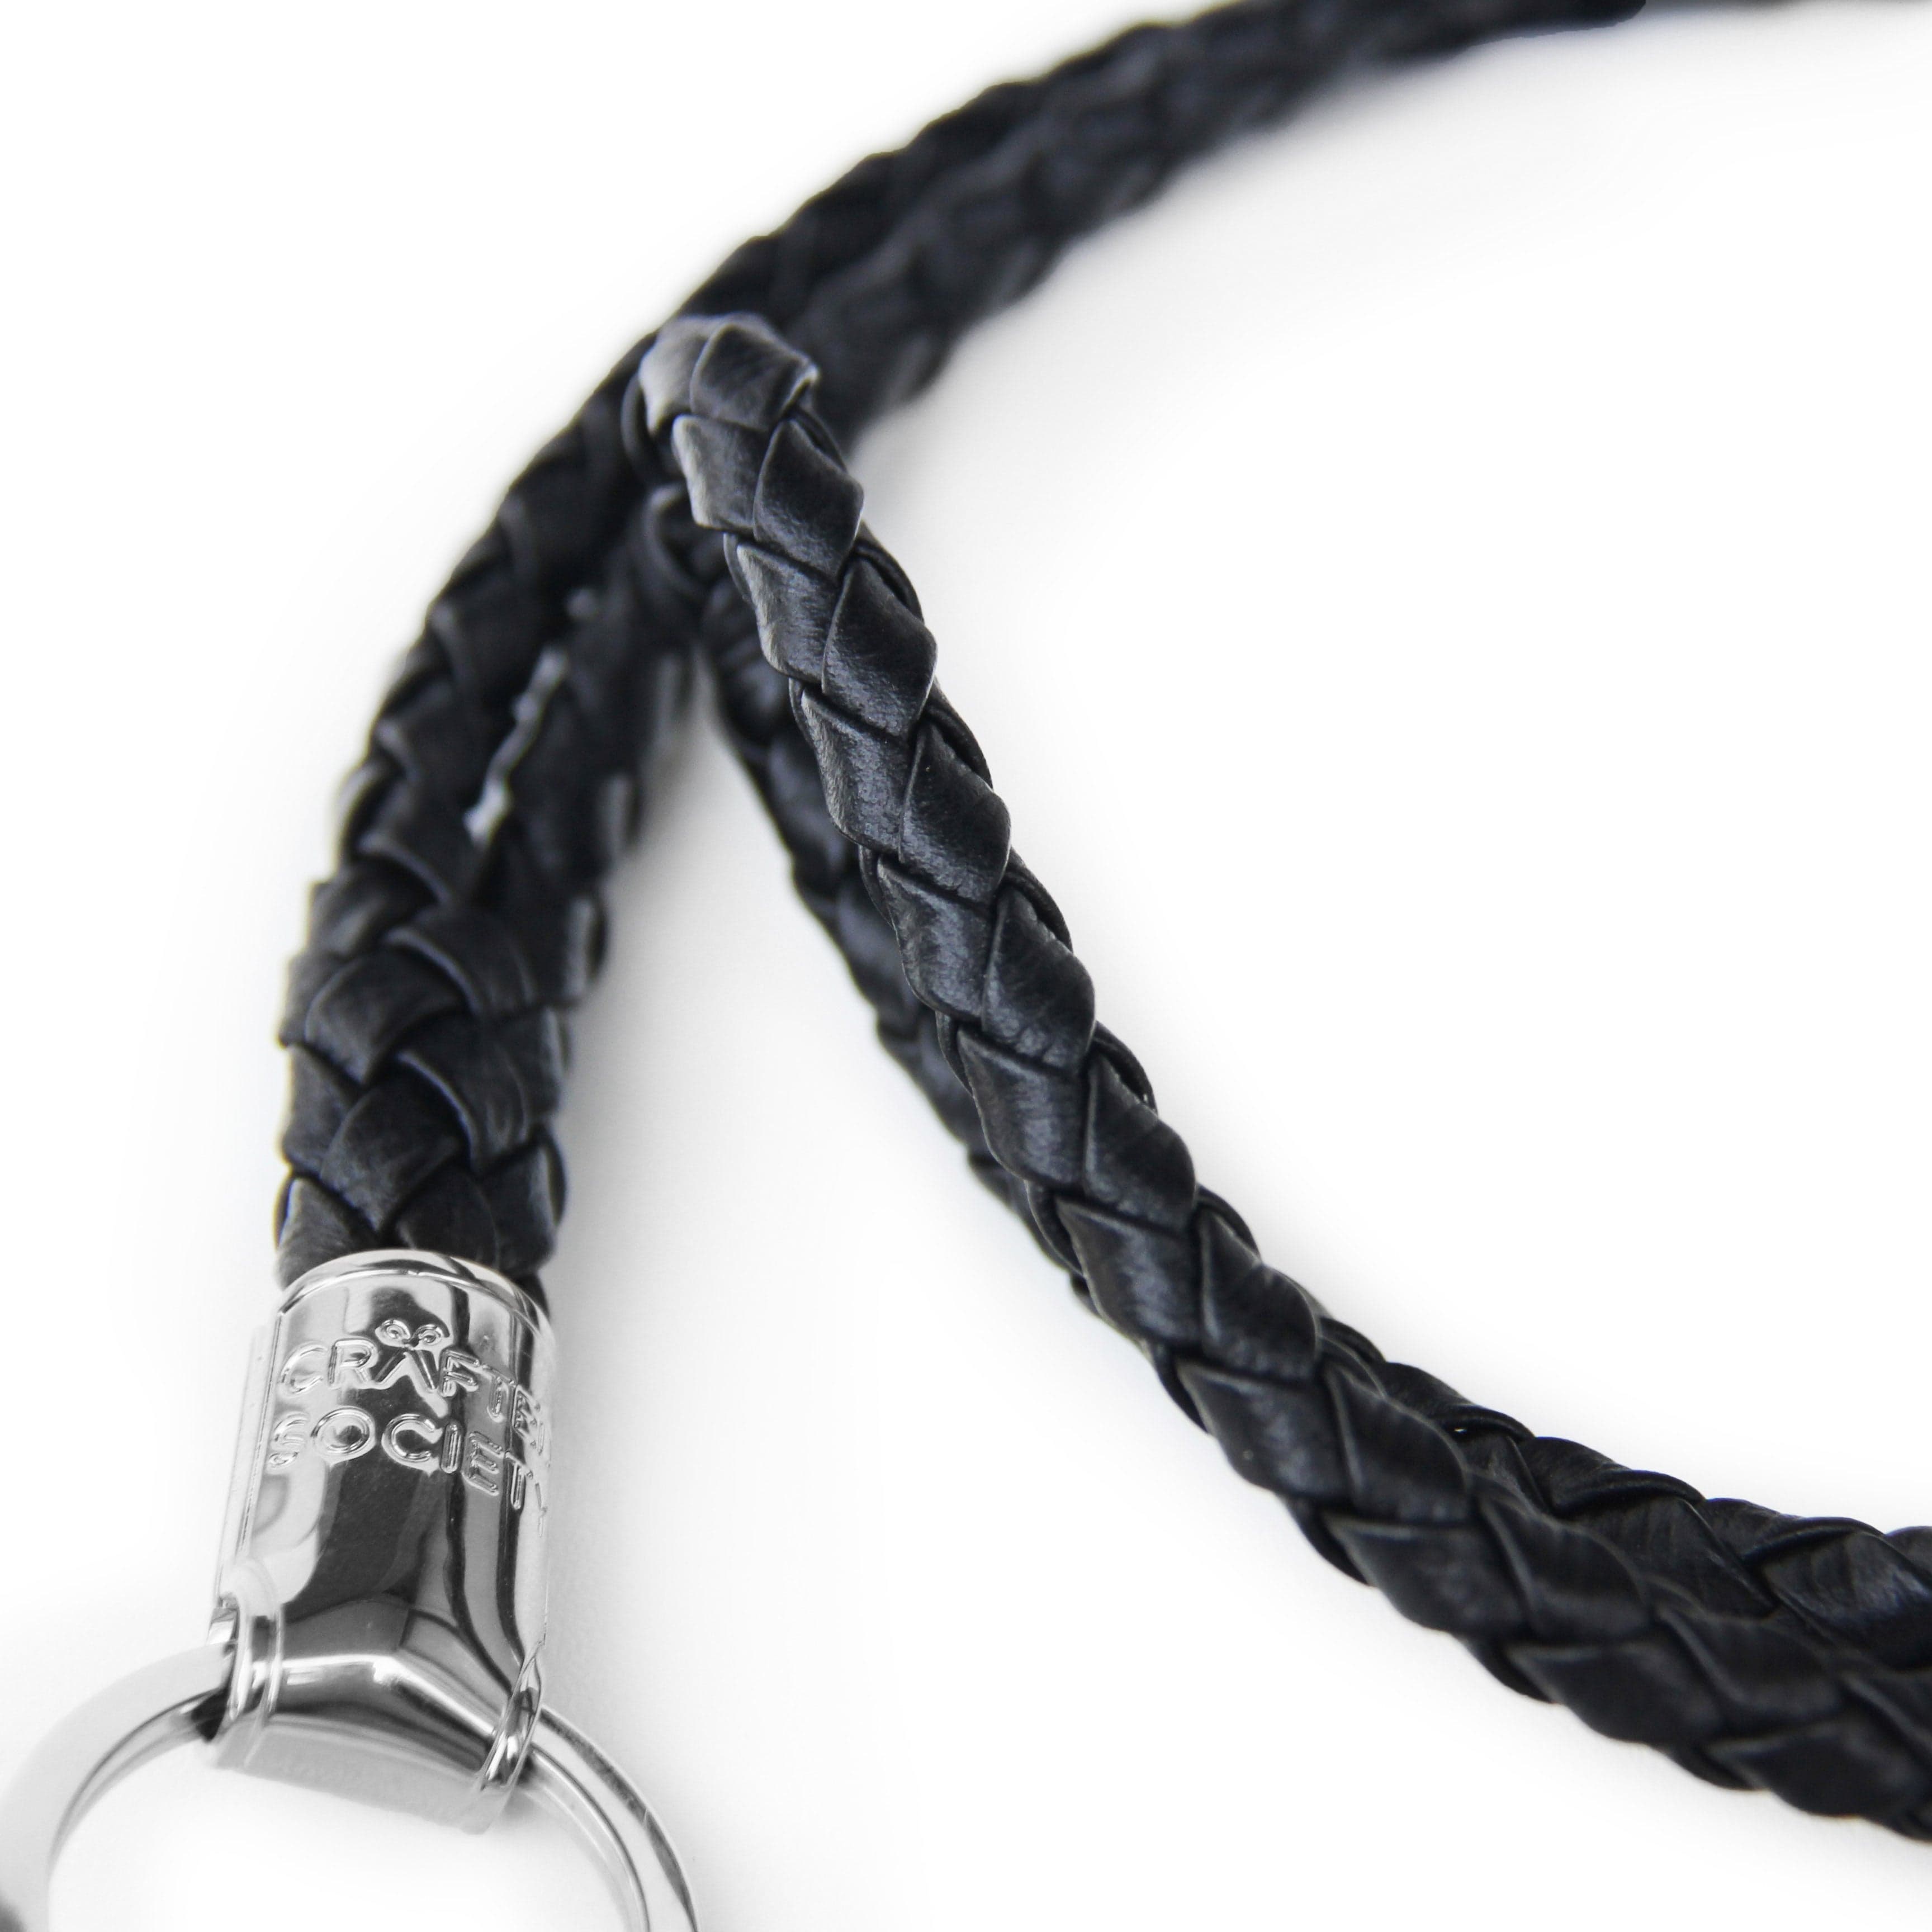 Mauro Lanyard - Black Saffiano Leather - Handcrafted in Italy